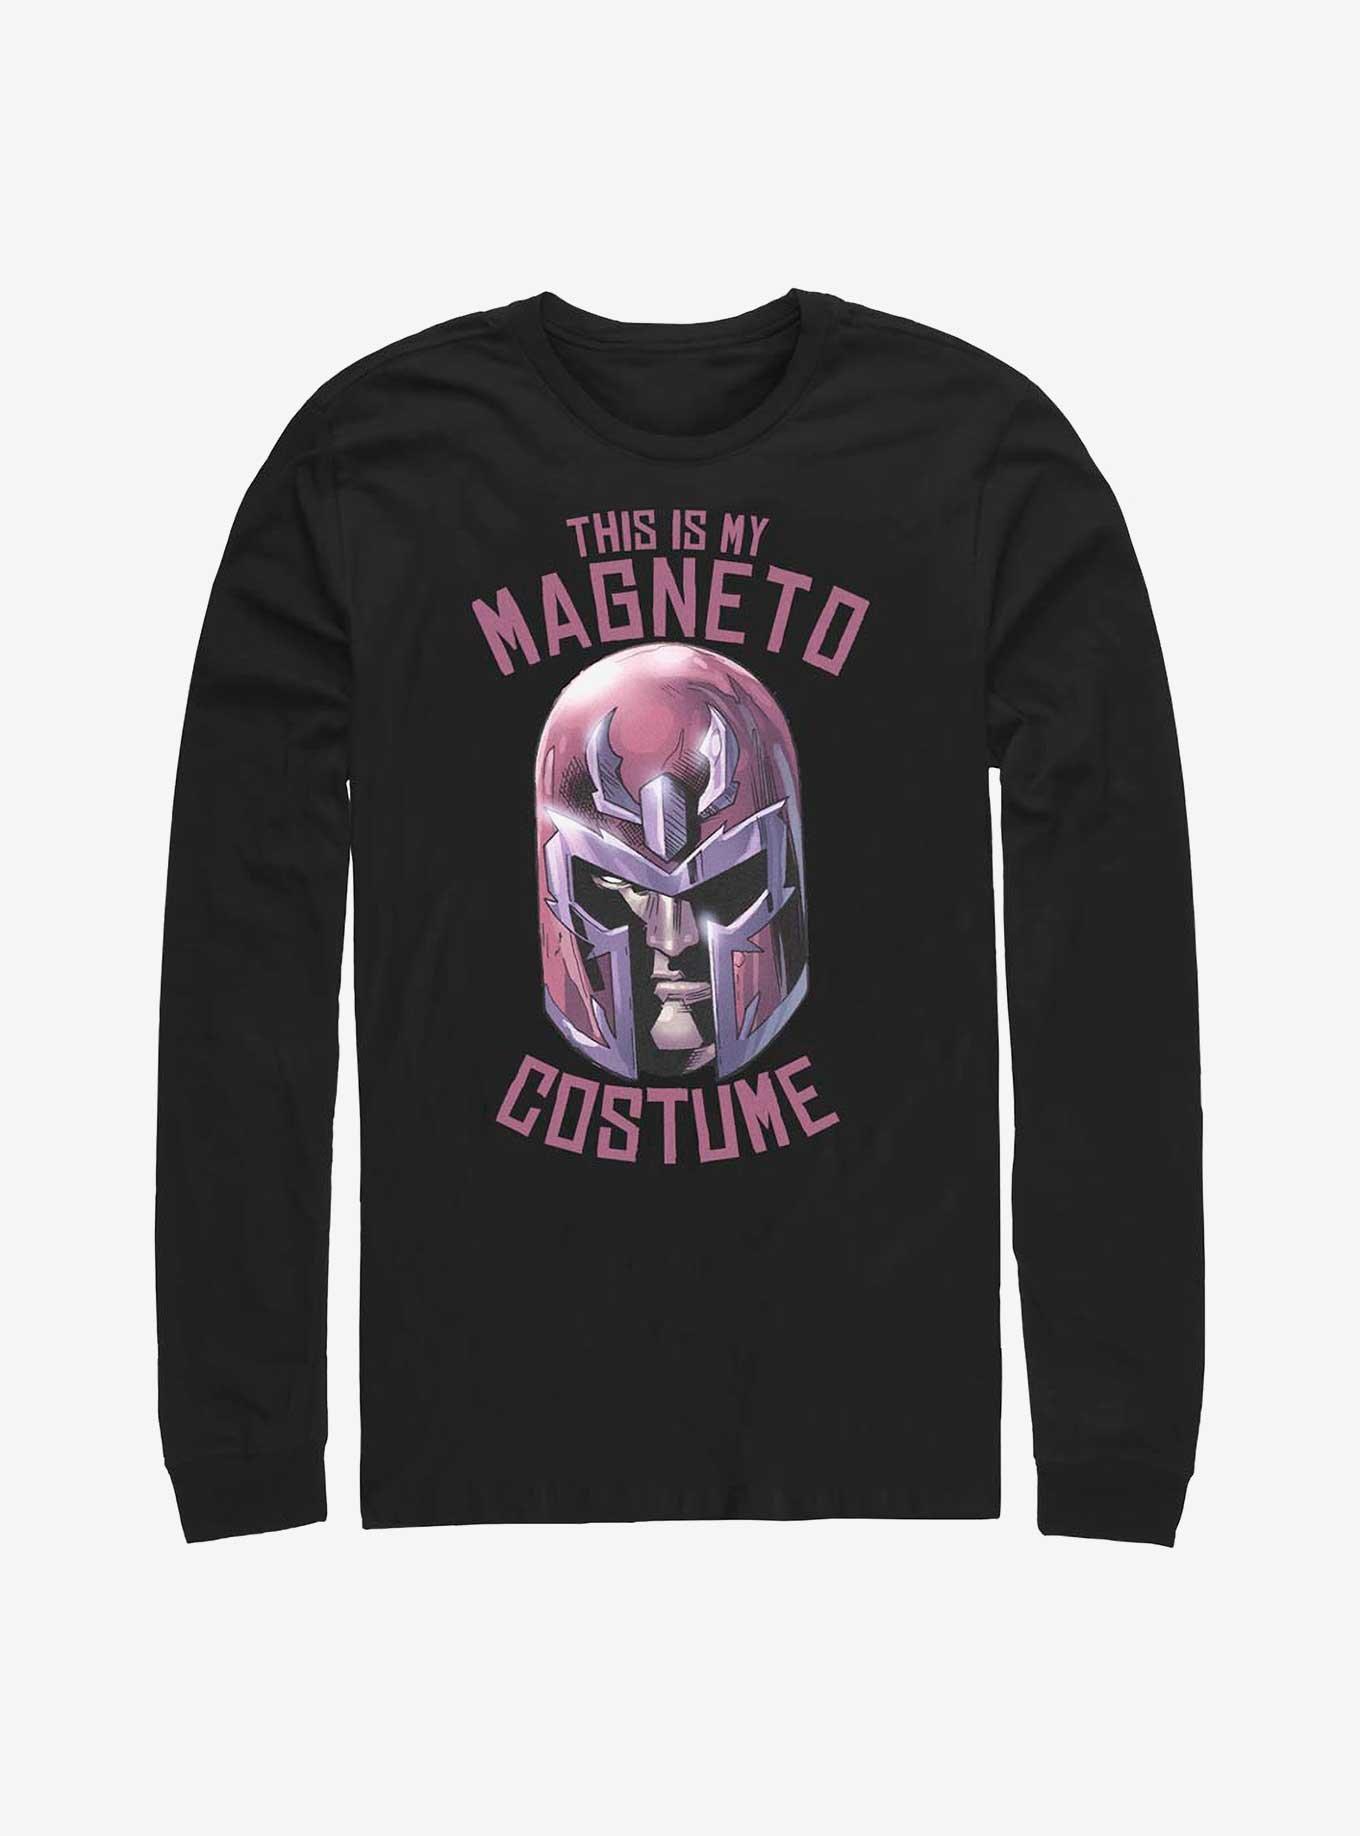 Marvel X-Men This Is My Magneto Costume Long-Sleeve T-Shirt